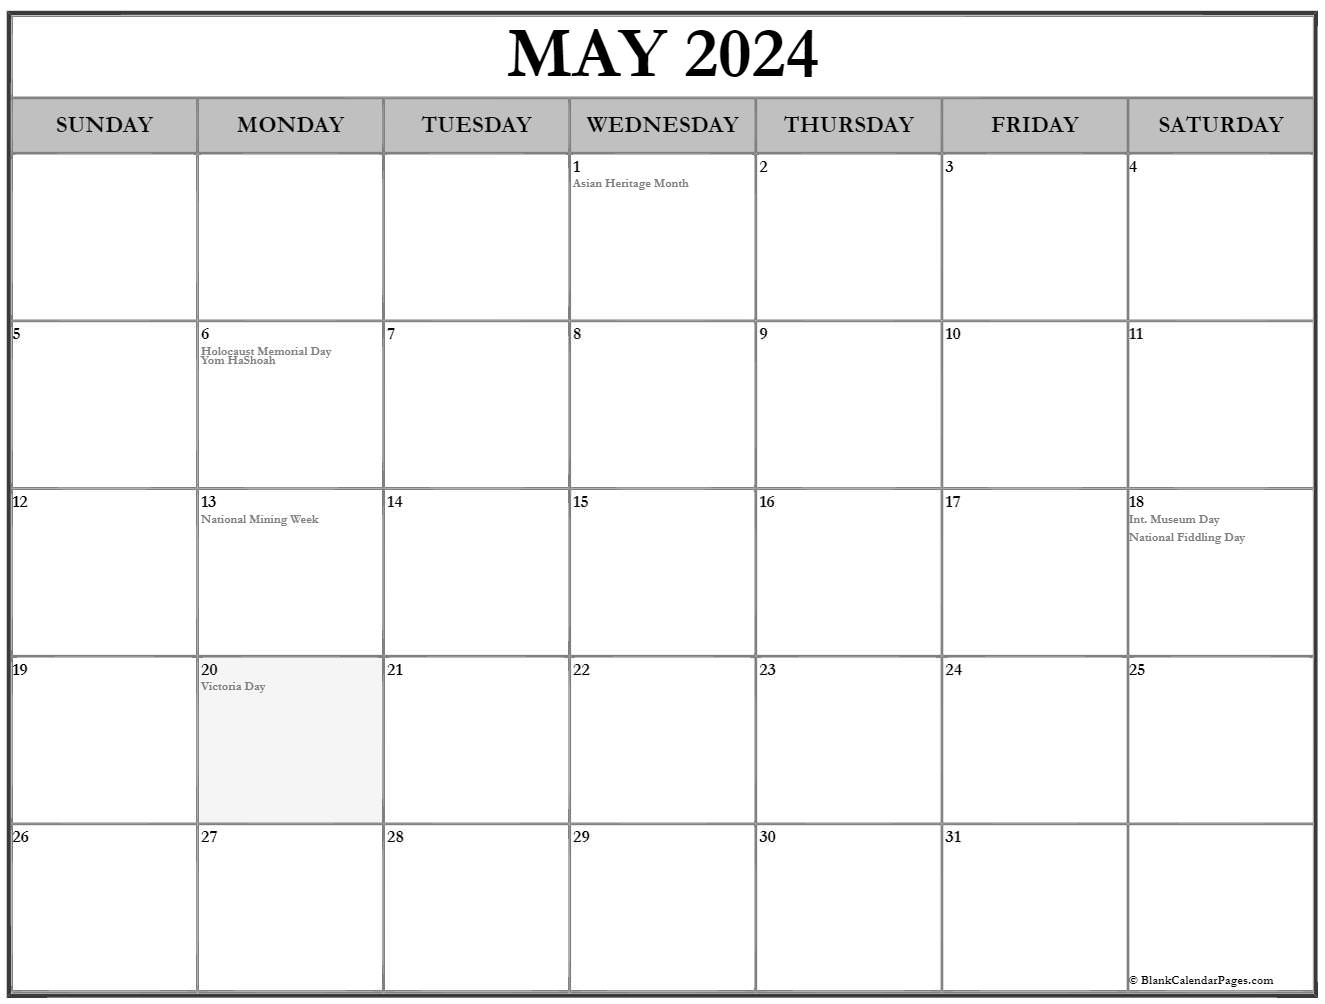 Collection of May 2020 calendars with holidays